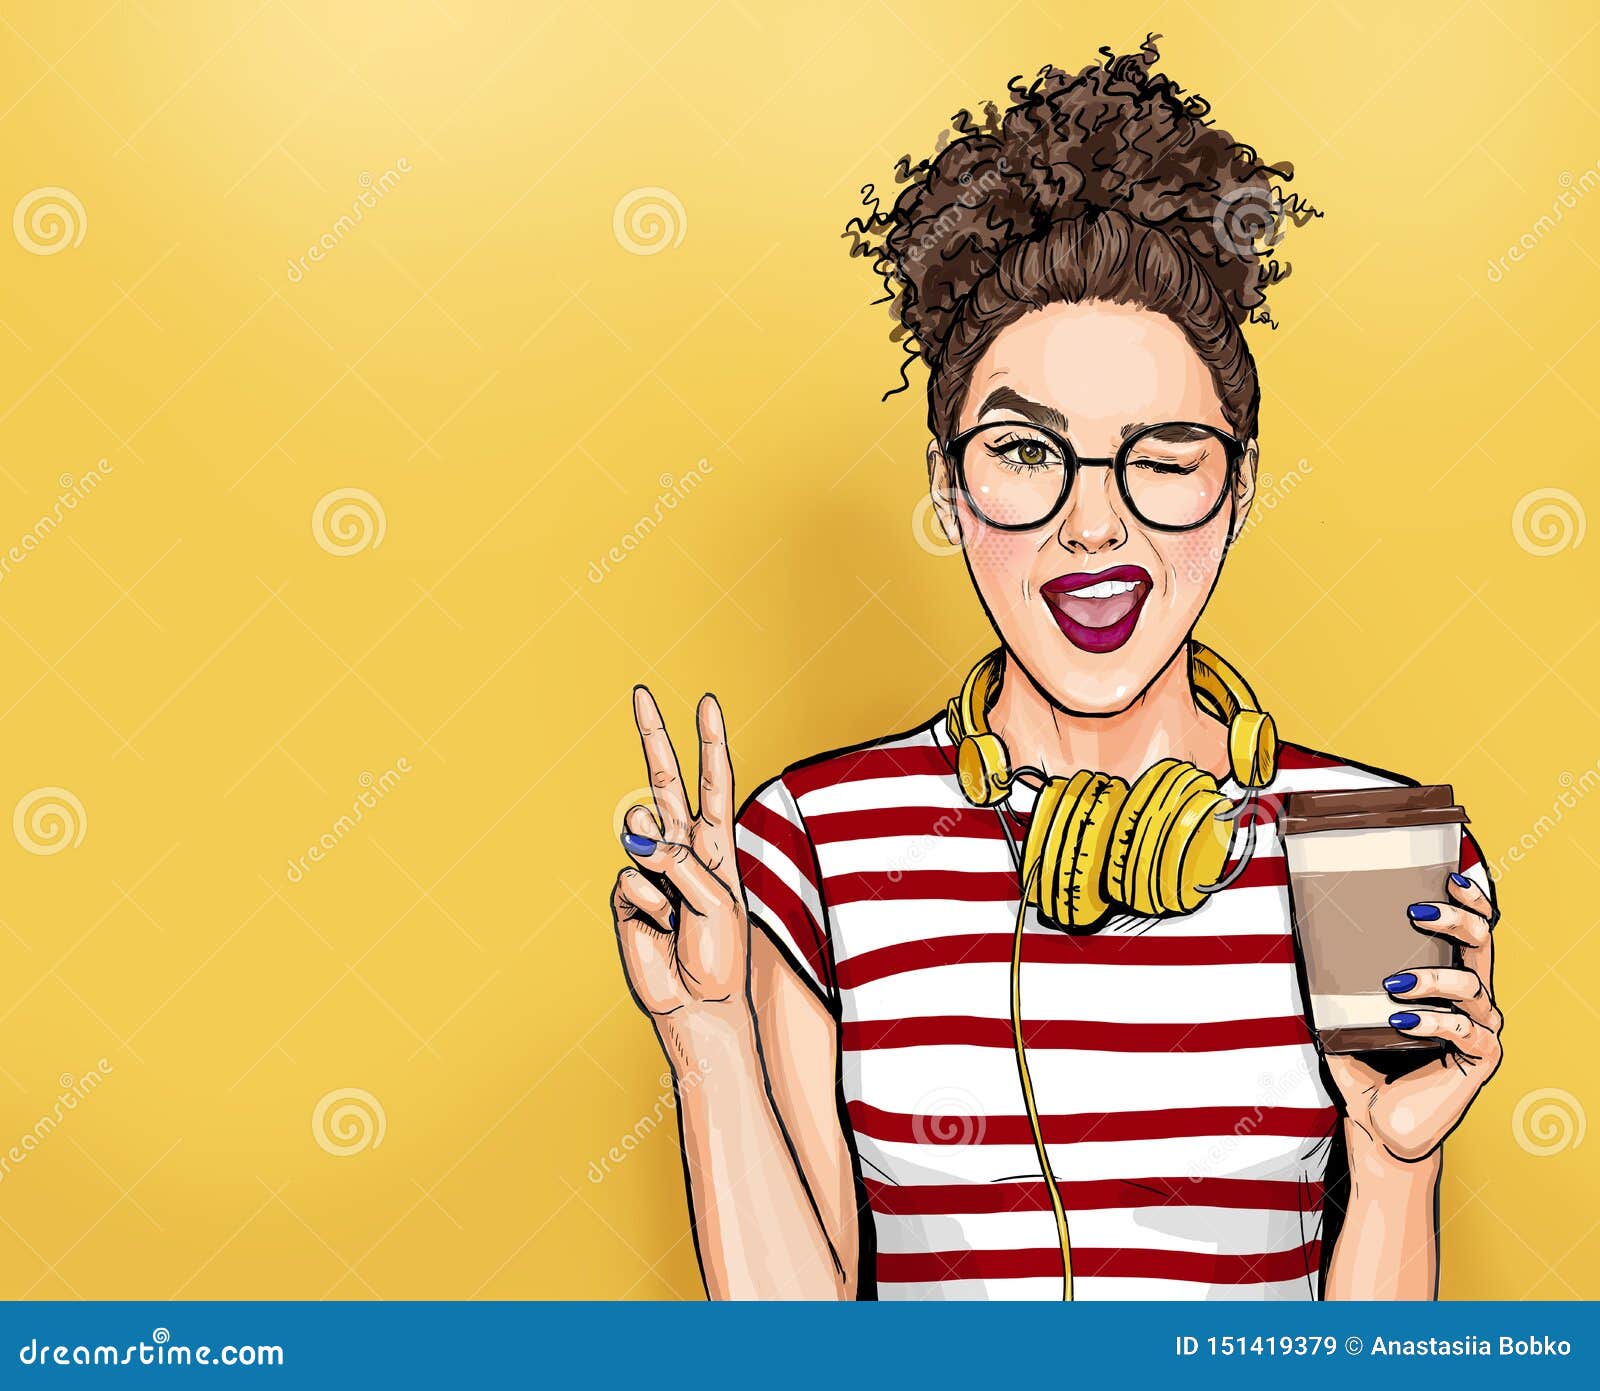 winking woman in glasses with head phones makes peace gesture  pop art girl holding coffee cup.